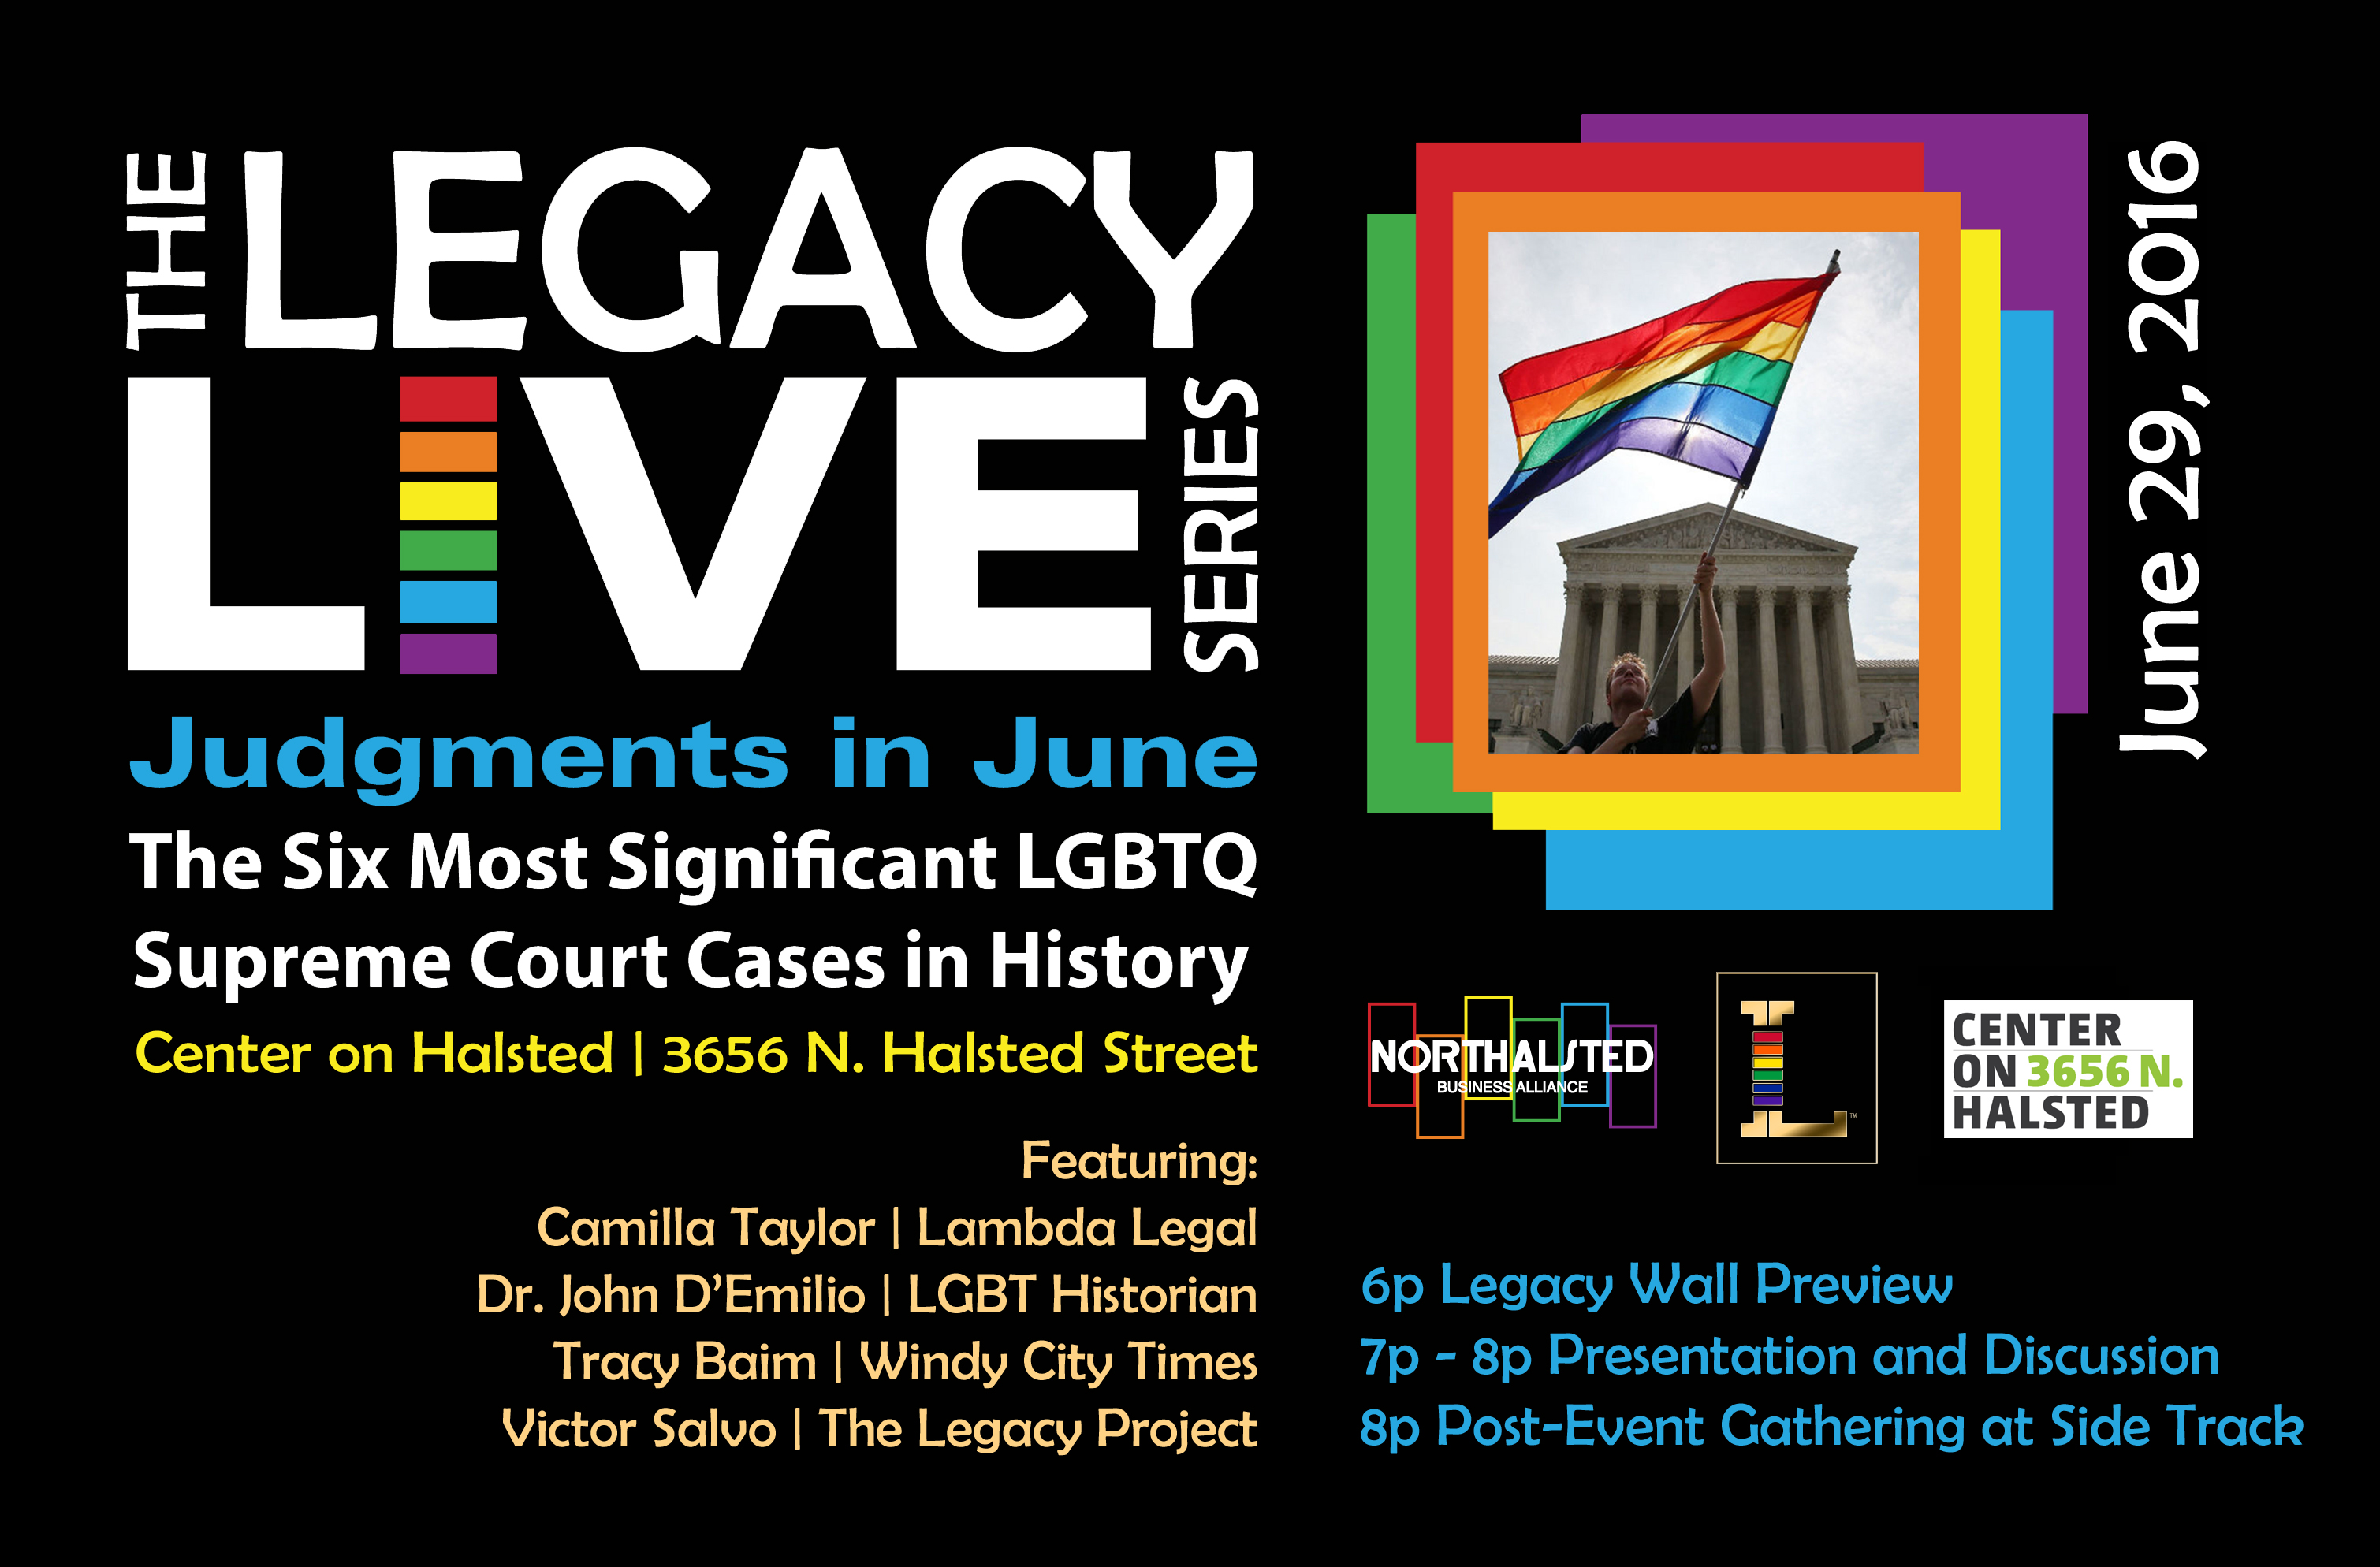 LEGACY LIVE Judgments in June The Six Most Significant LGBTQ Supreme Court Cases in History 2016